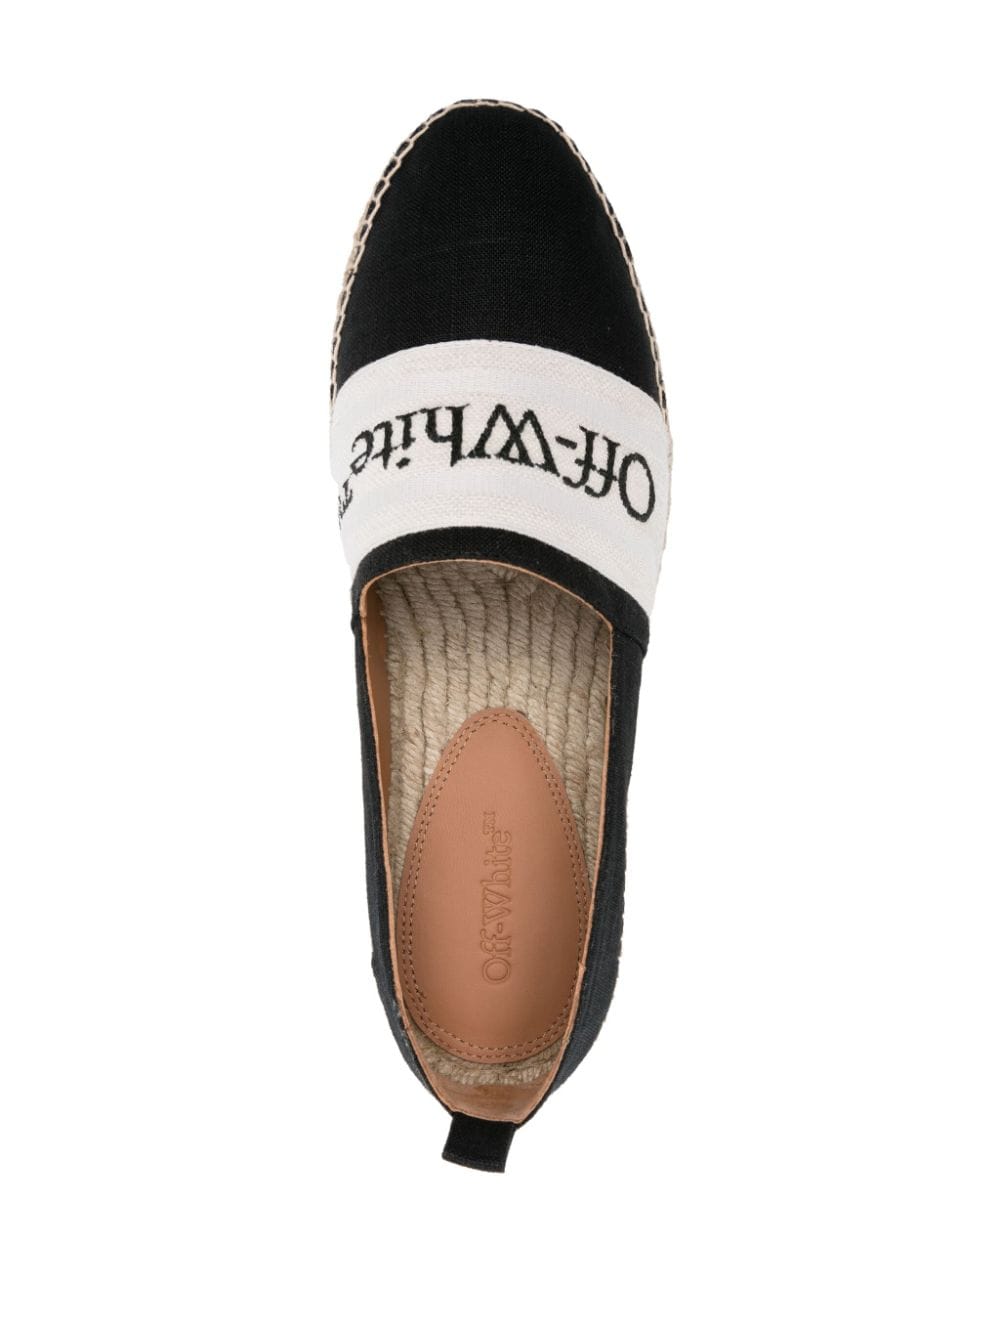 Off White Flat Shoes Black